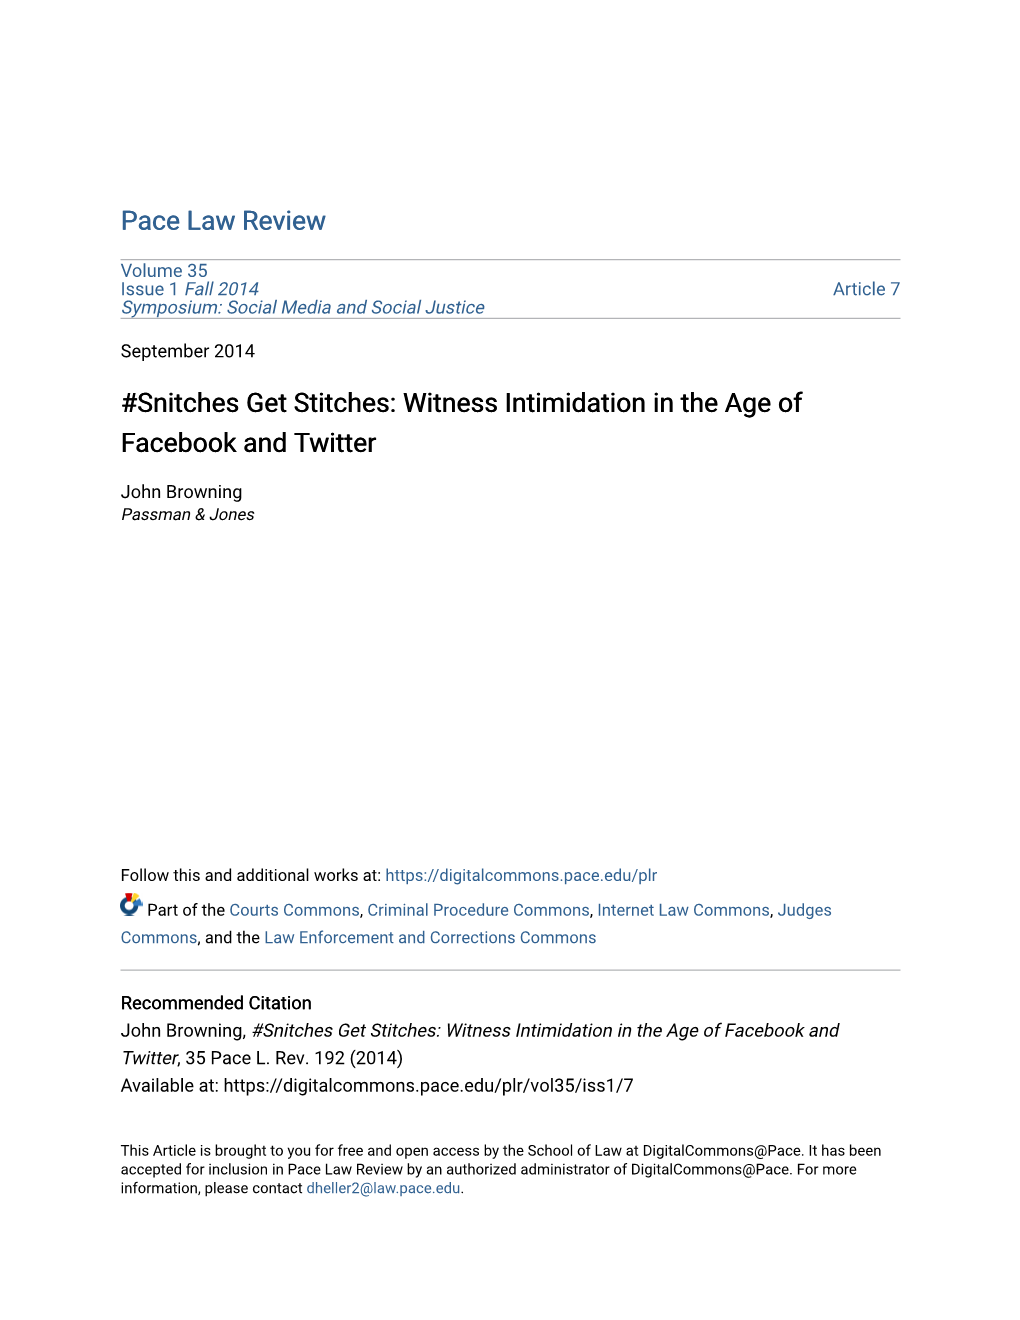 Snitches Get Stitches: Witness Intimidation in the Age of Facebook and Twitter